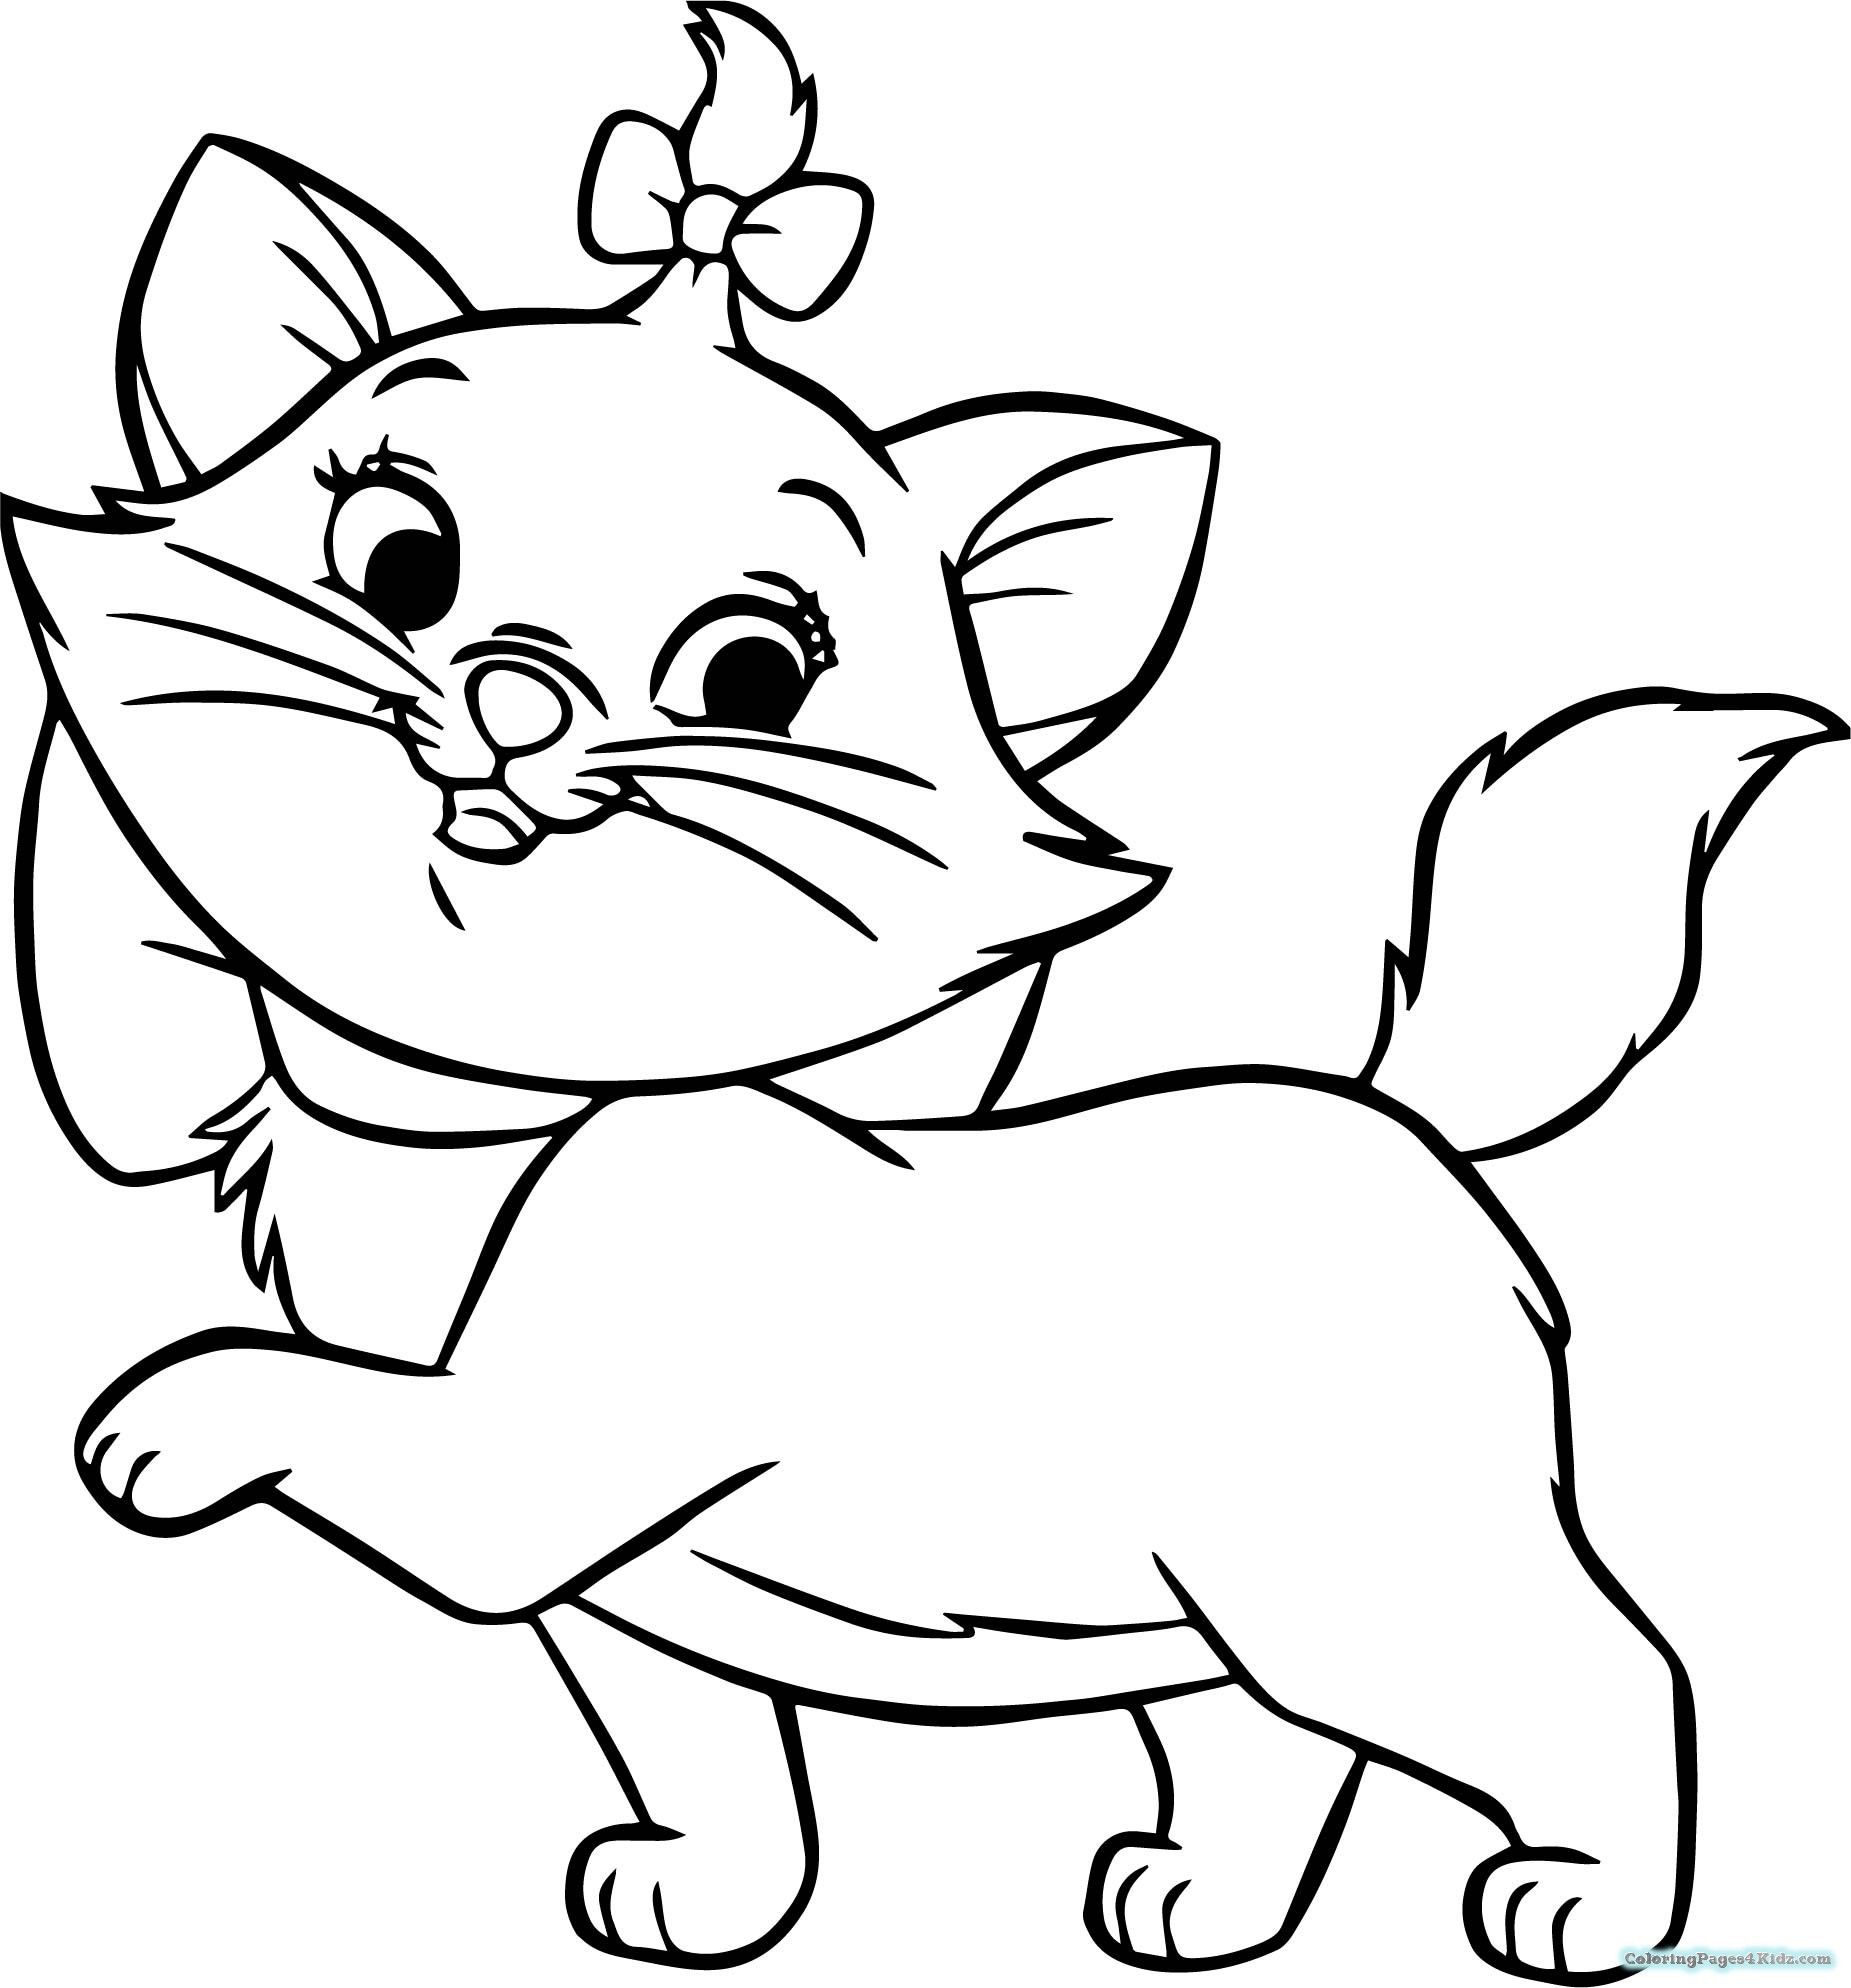 Kitten Coloring Pages at GetDrawings Free download